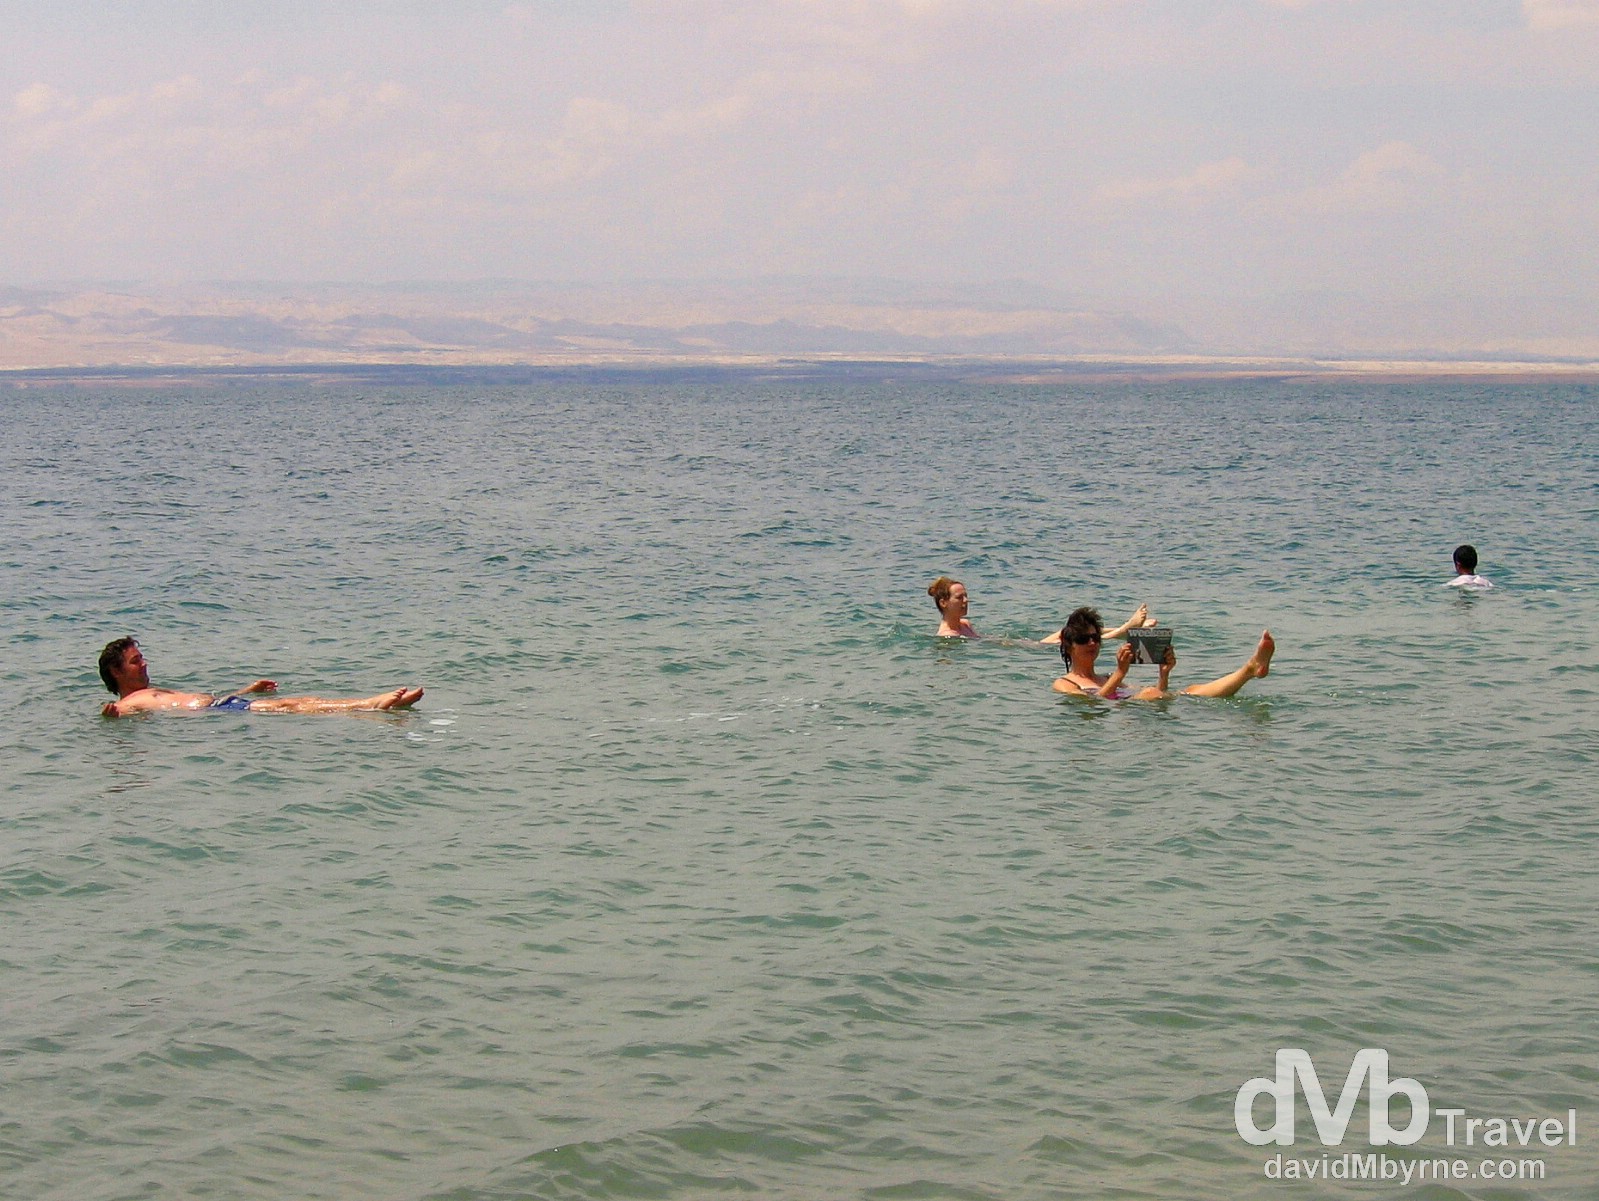 Floating in the Dead Sea, Jordan, the lowest point on earth. April 29th 2008.